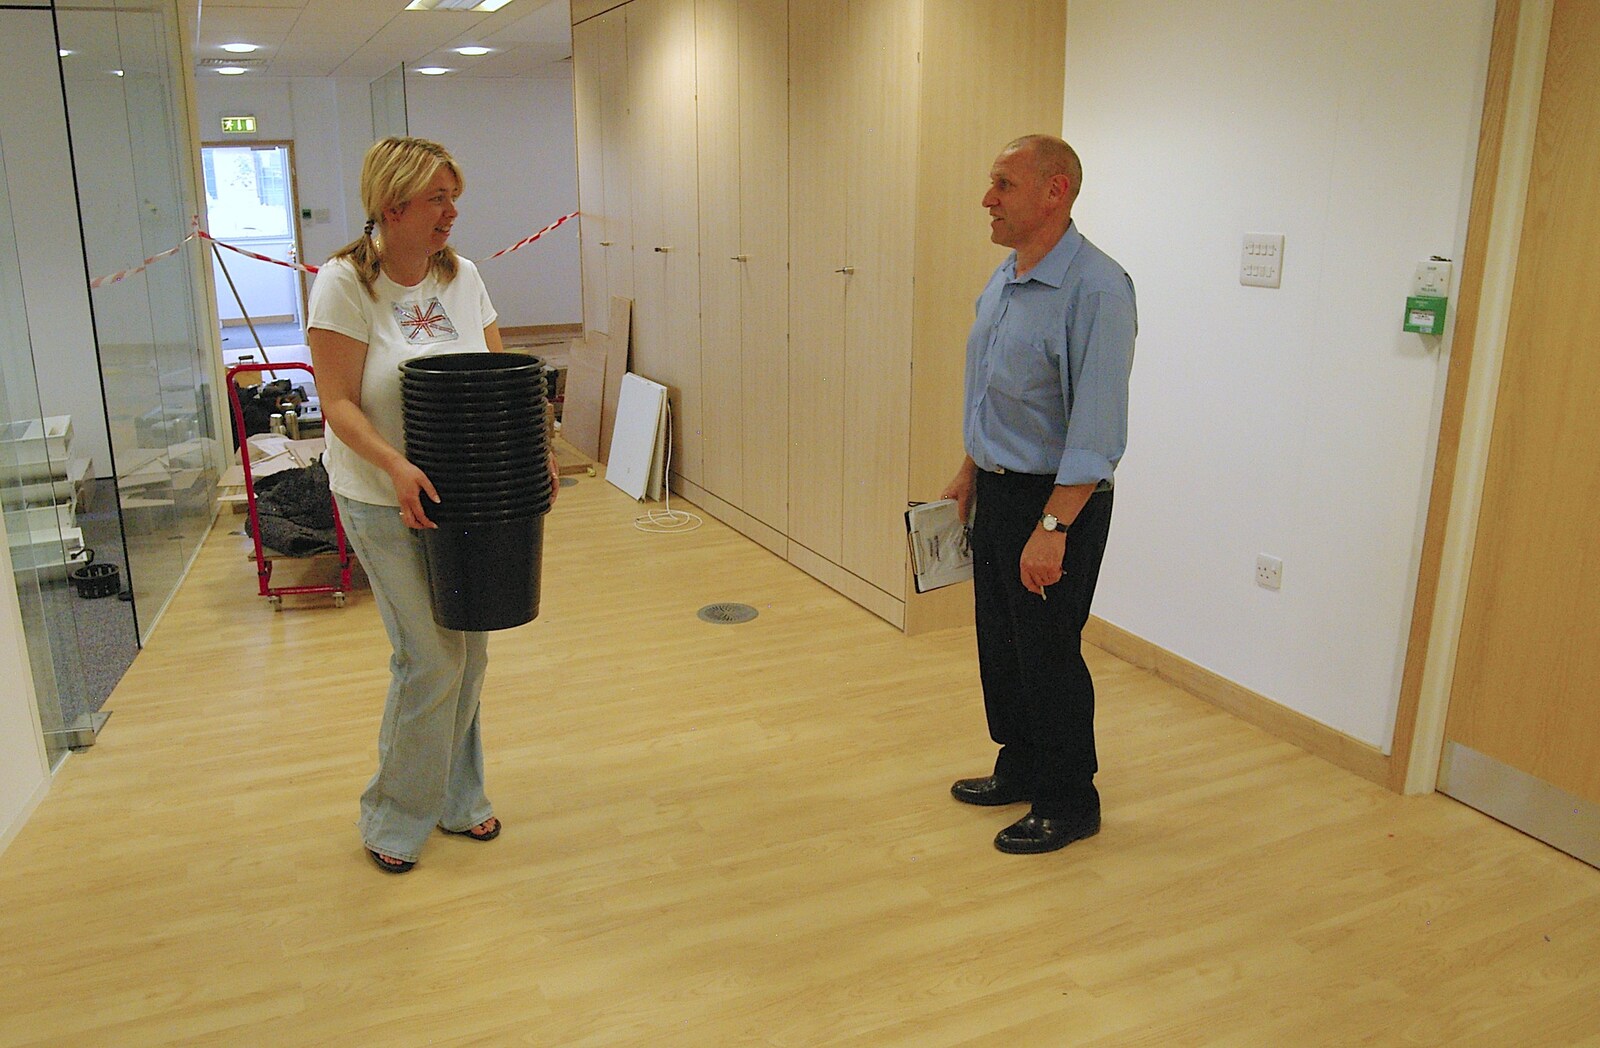 Clare wanders around armed with bins from Qualcomm Moves Offices, Milton Road, Cambridge - 26th July 2006